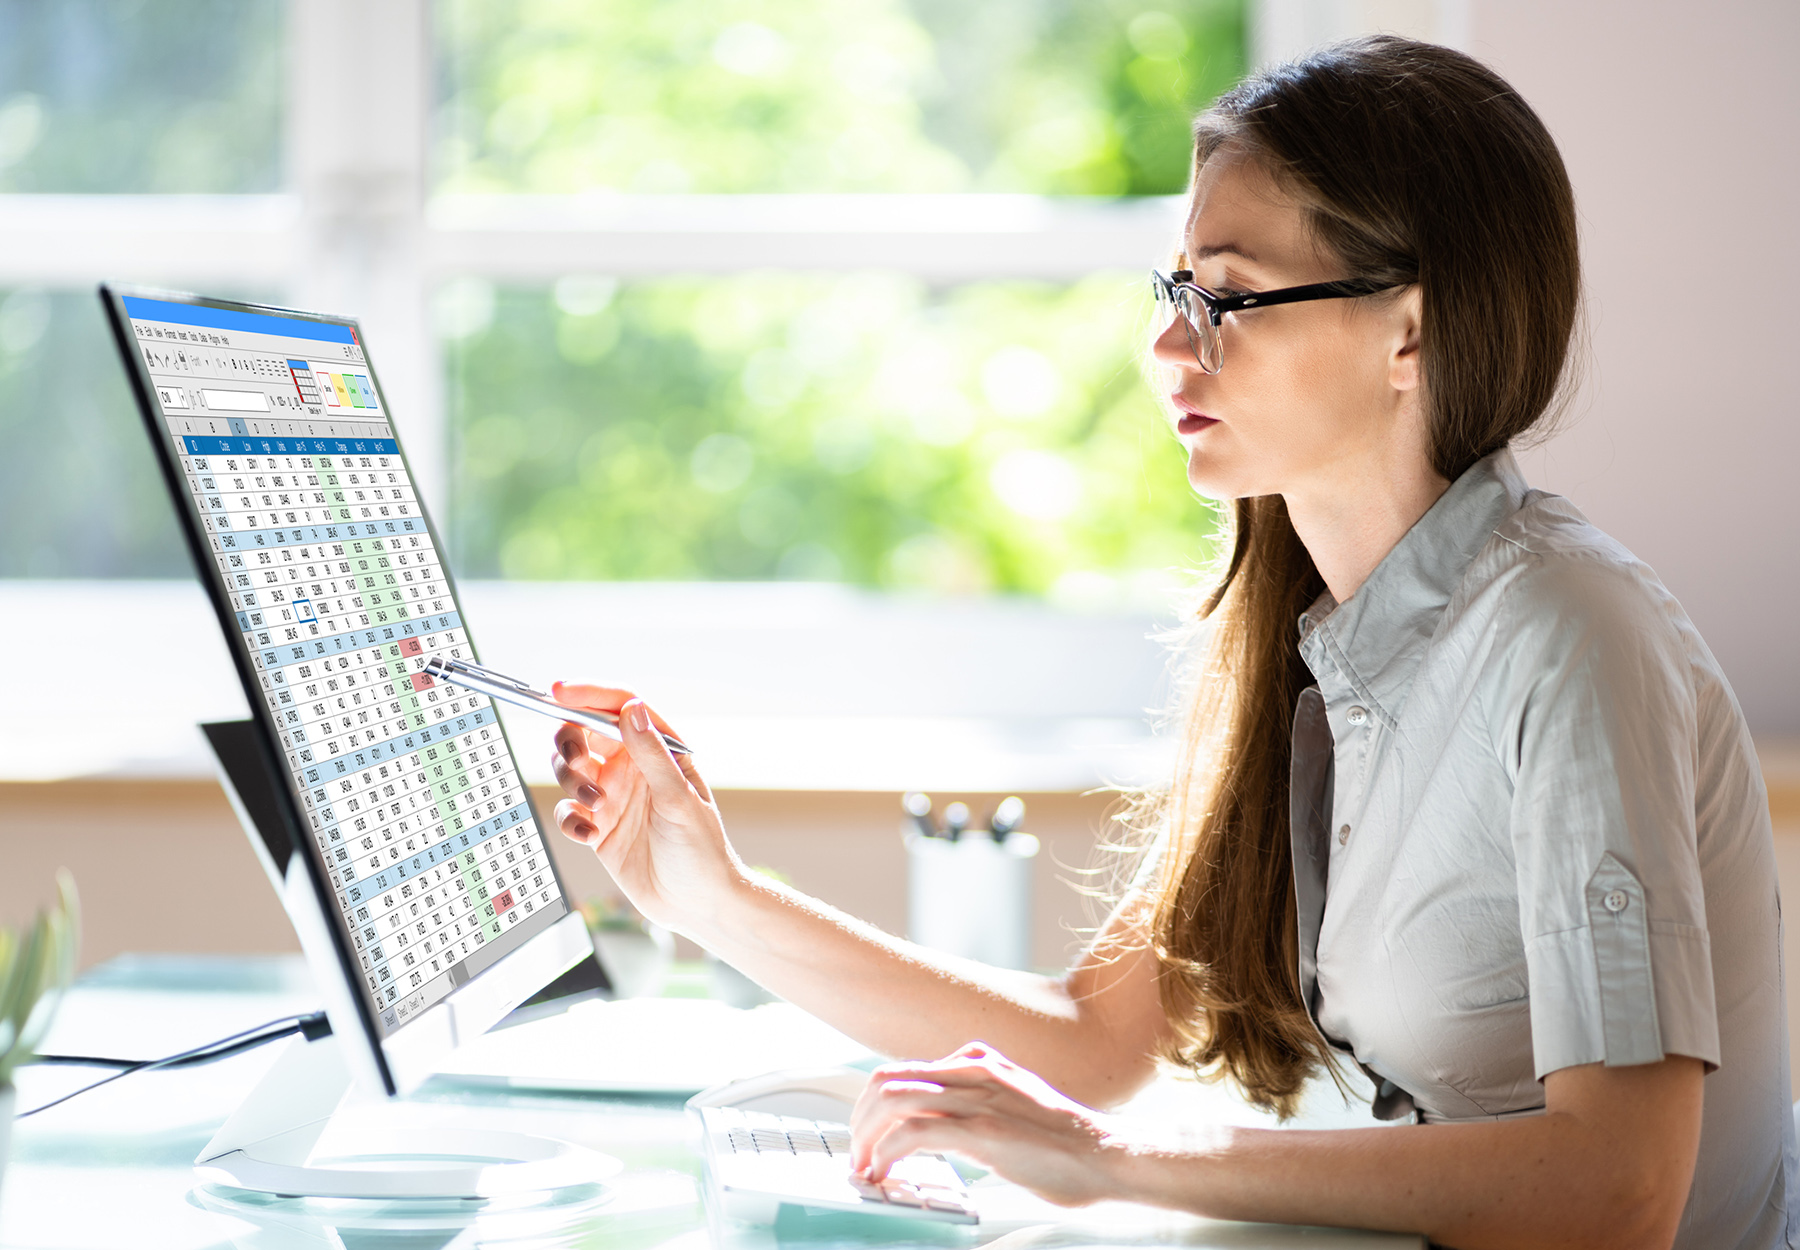 Female lab employee with glasses looks at spreadsheet on a computer monitoring. She is pointing something out with a pencil on the screen. Stock photo.